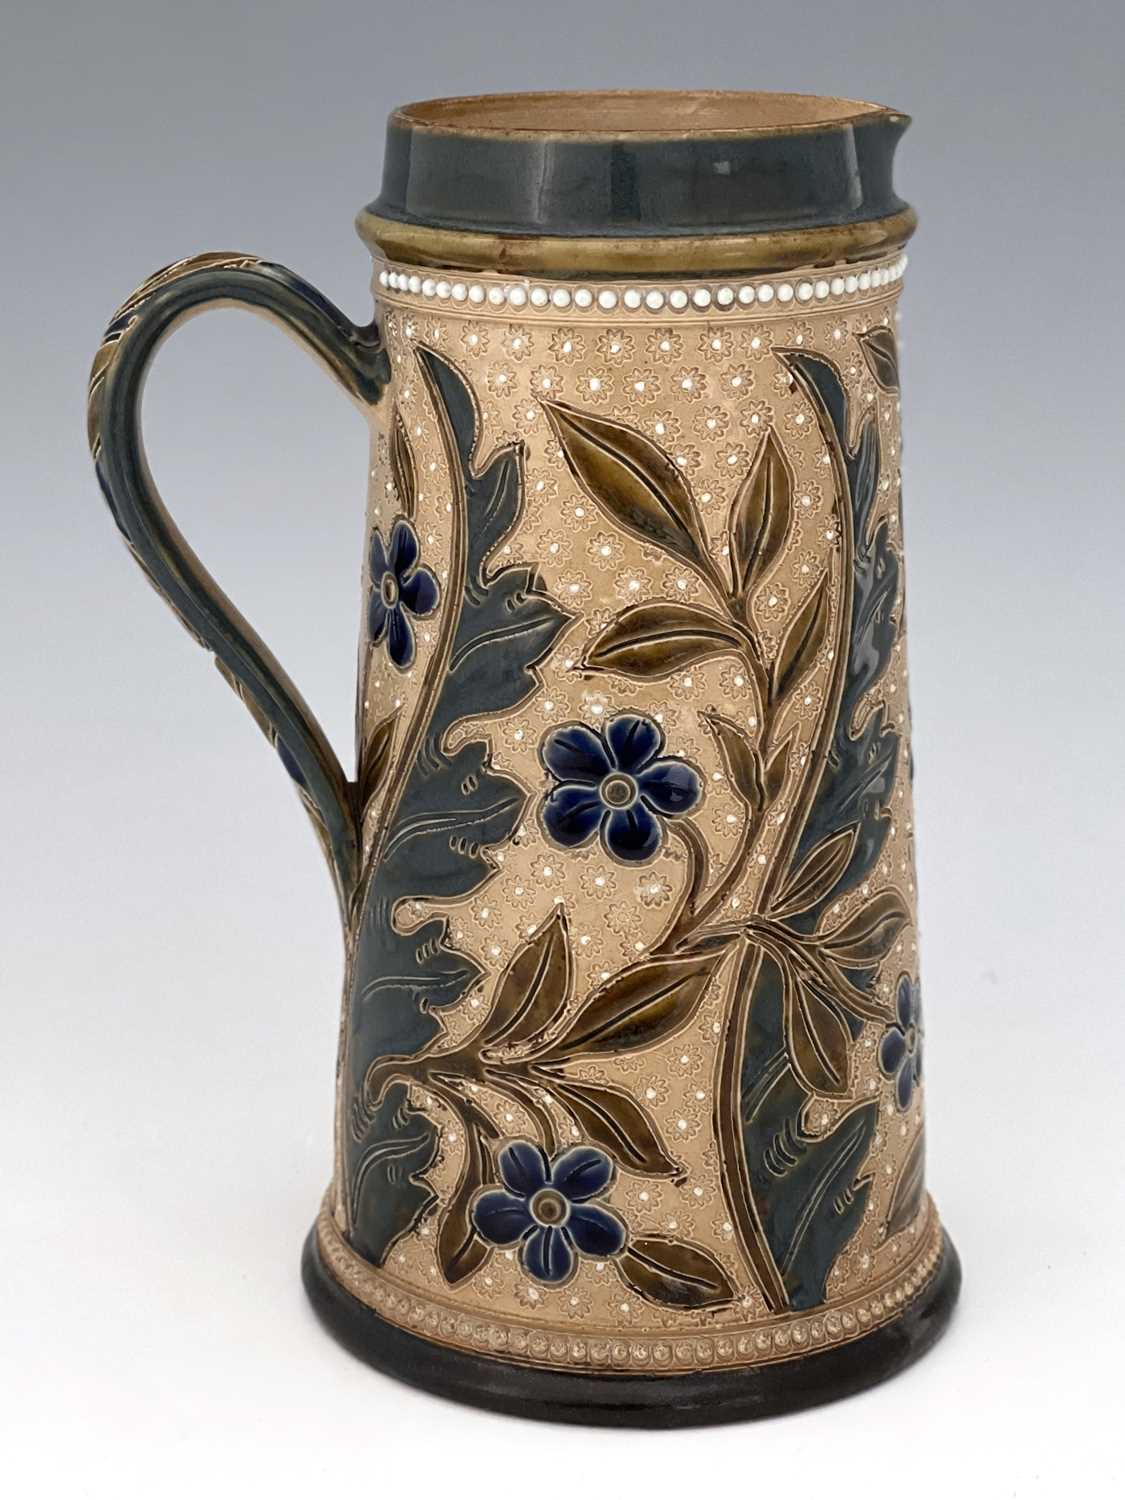 Louisa Davis for Doulton Lambeth, a stoneware jug, 1877, conical form, sgraffito decorated with - Image 6 of 7